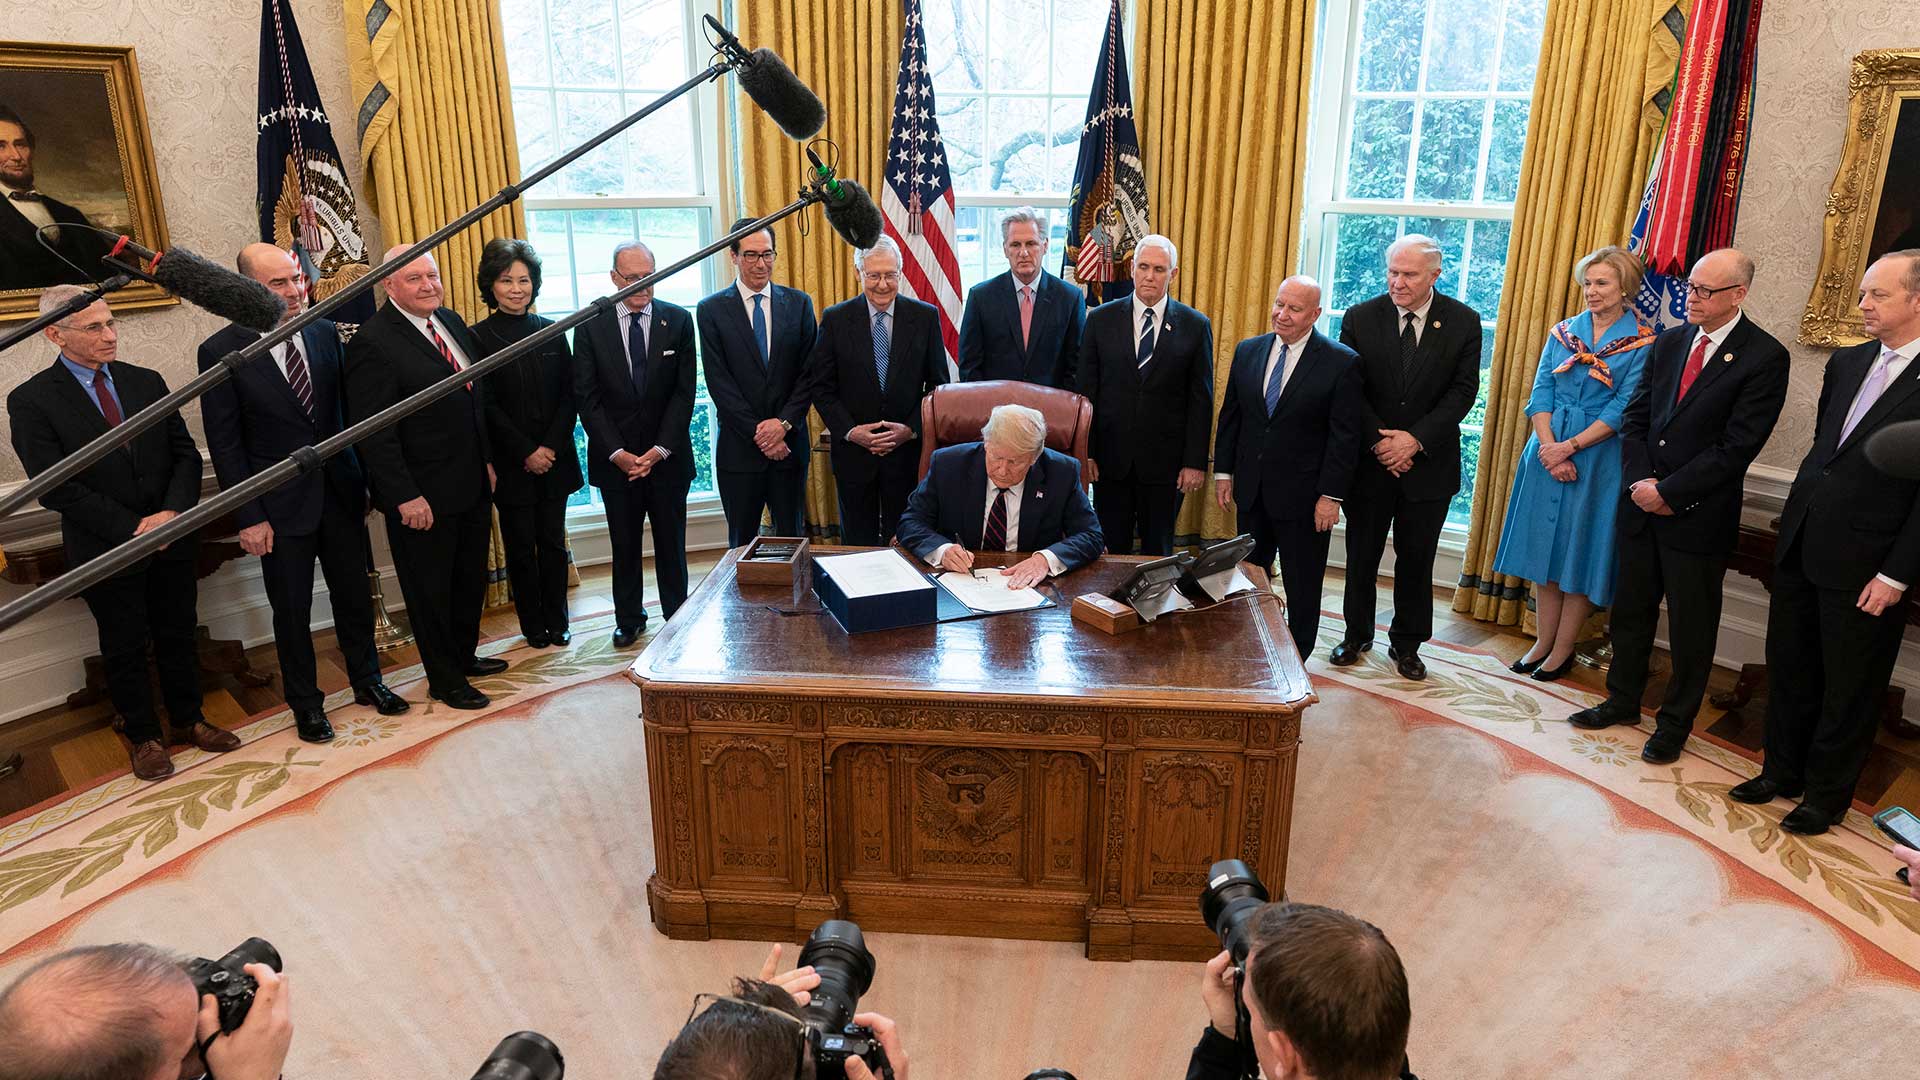 President Trump signs the $2.2 trillion COVID-19 relief package, March 27. DACA recipients in Arizona say it fails to protect mixed immigration status families during a crucial time.